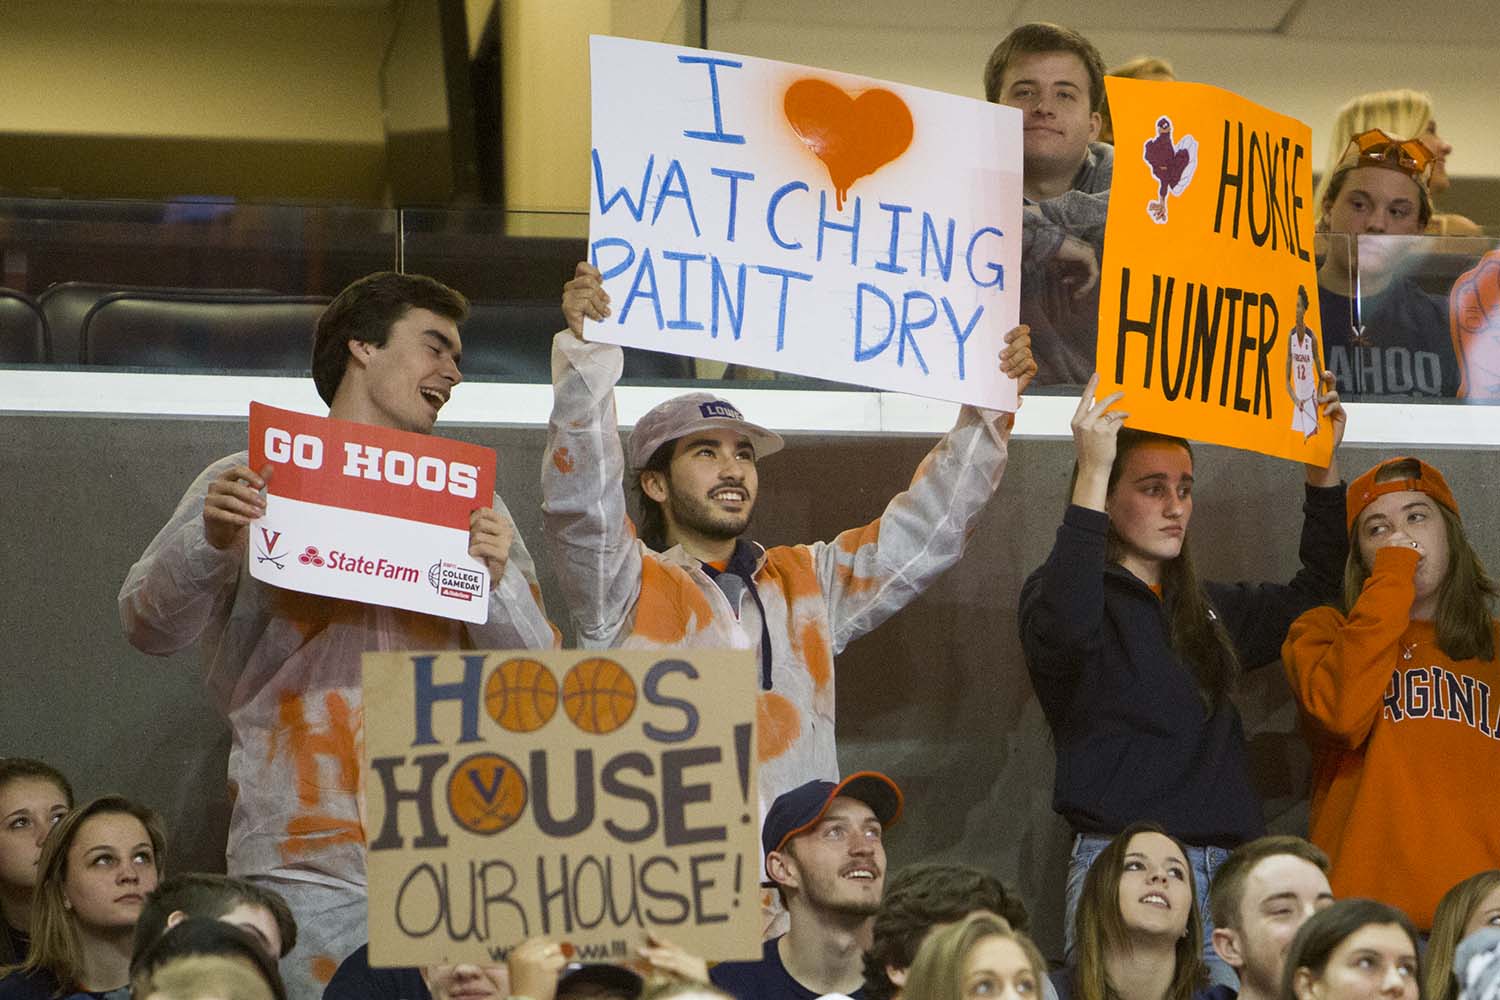 Sign reading "I like watching paint dry"  held by college students